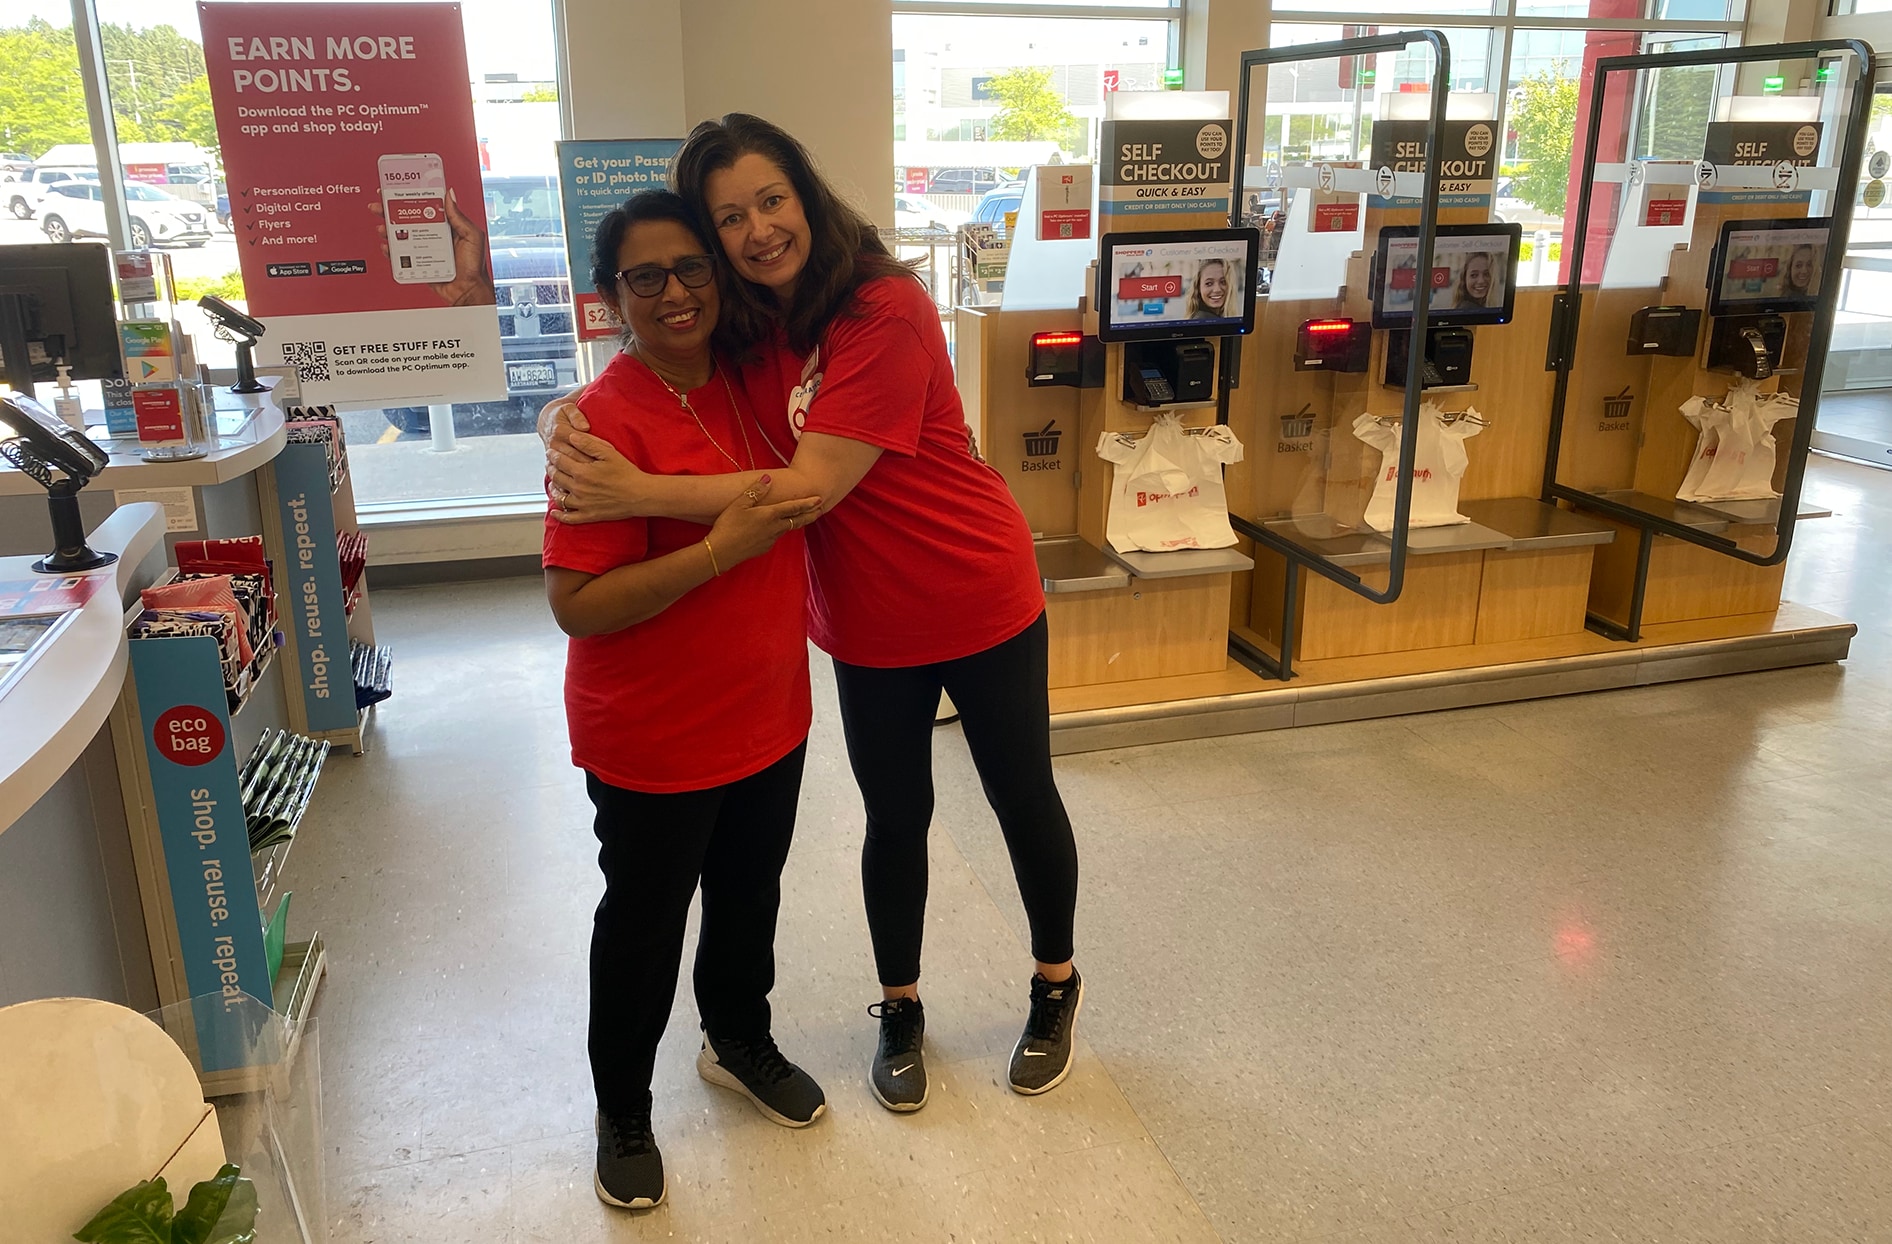 Tina and Linda embrace in front of the self-checkout machines inside their Shoppers Drug Mart location. 